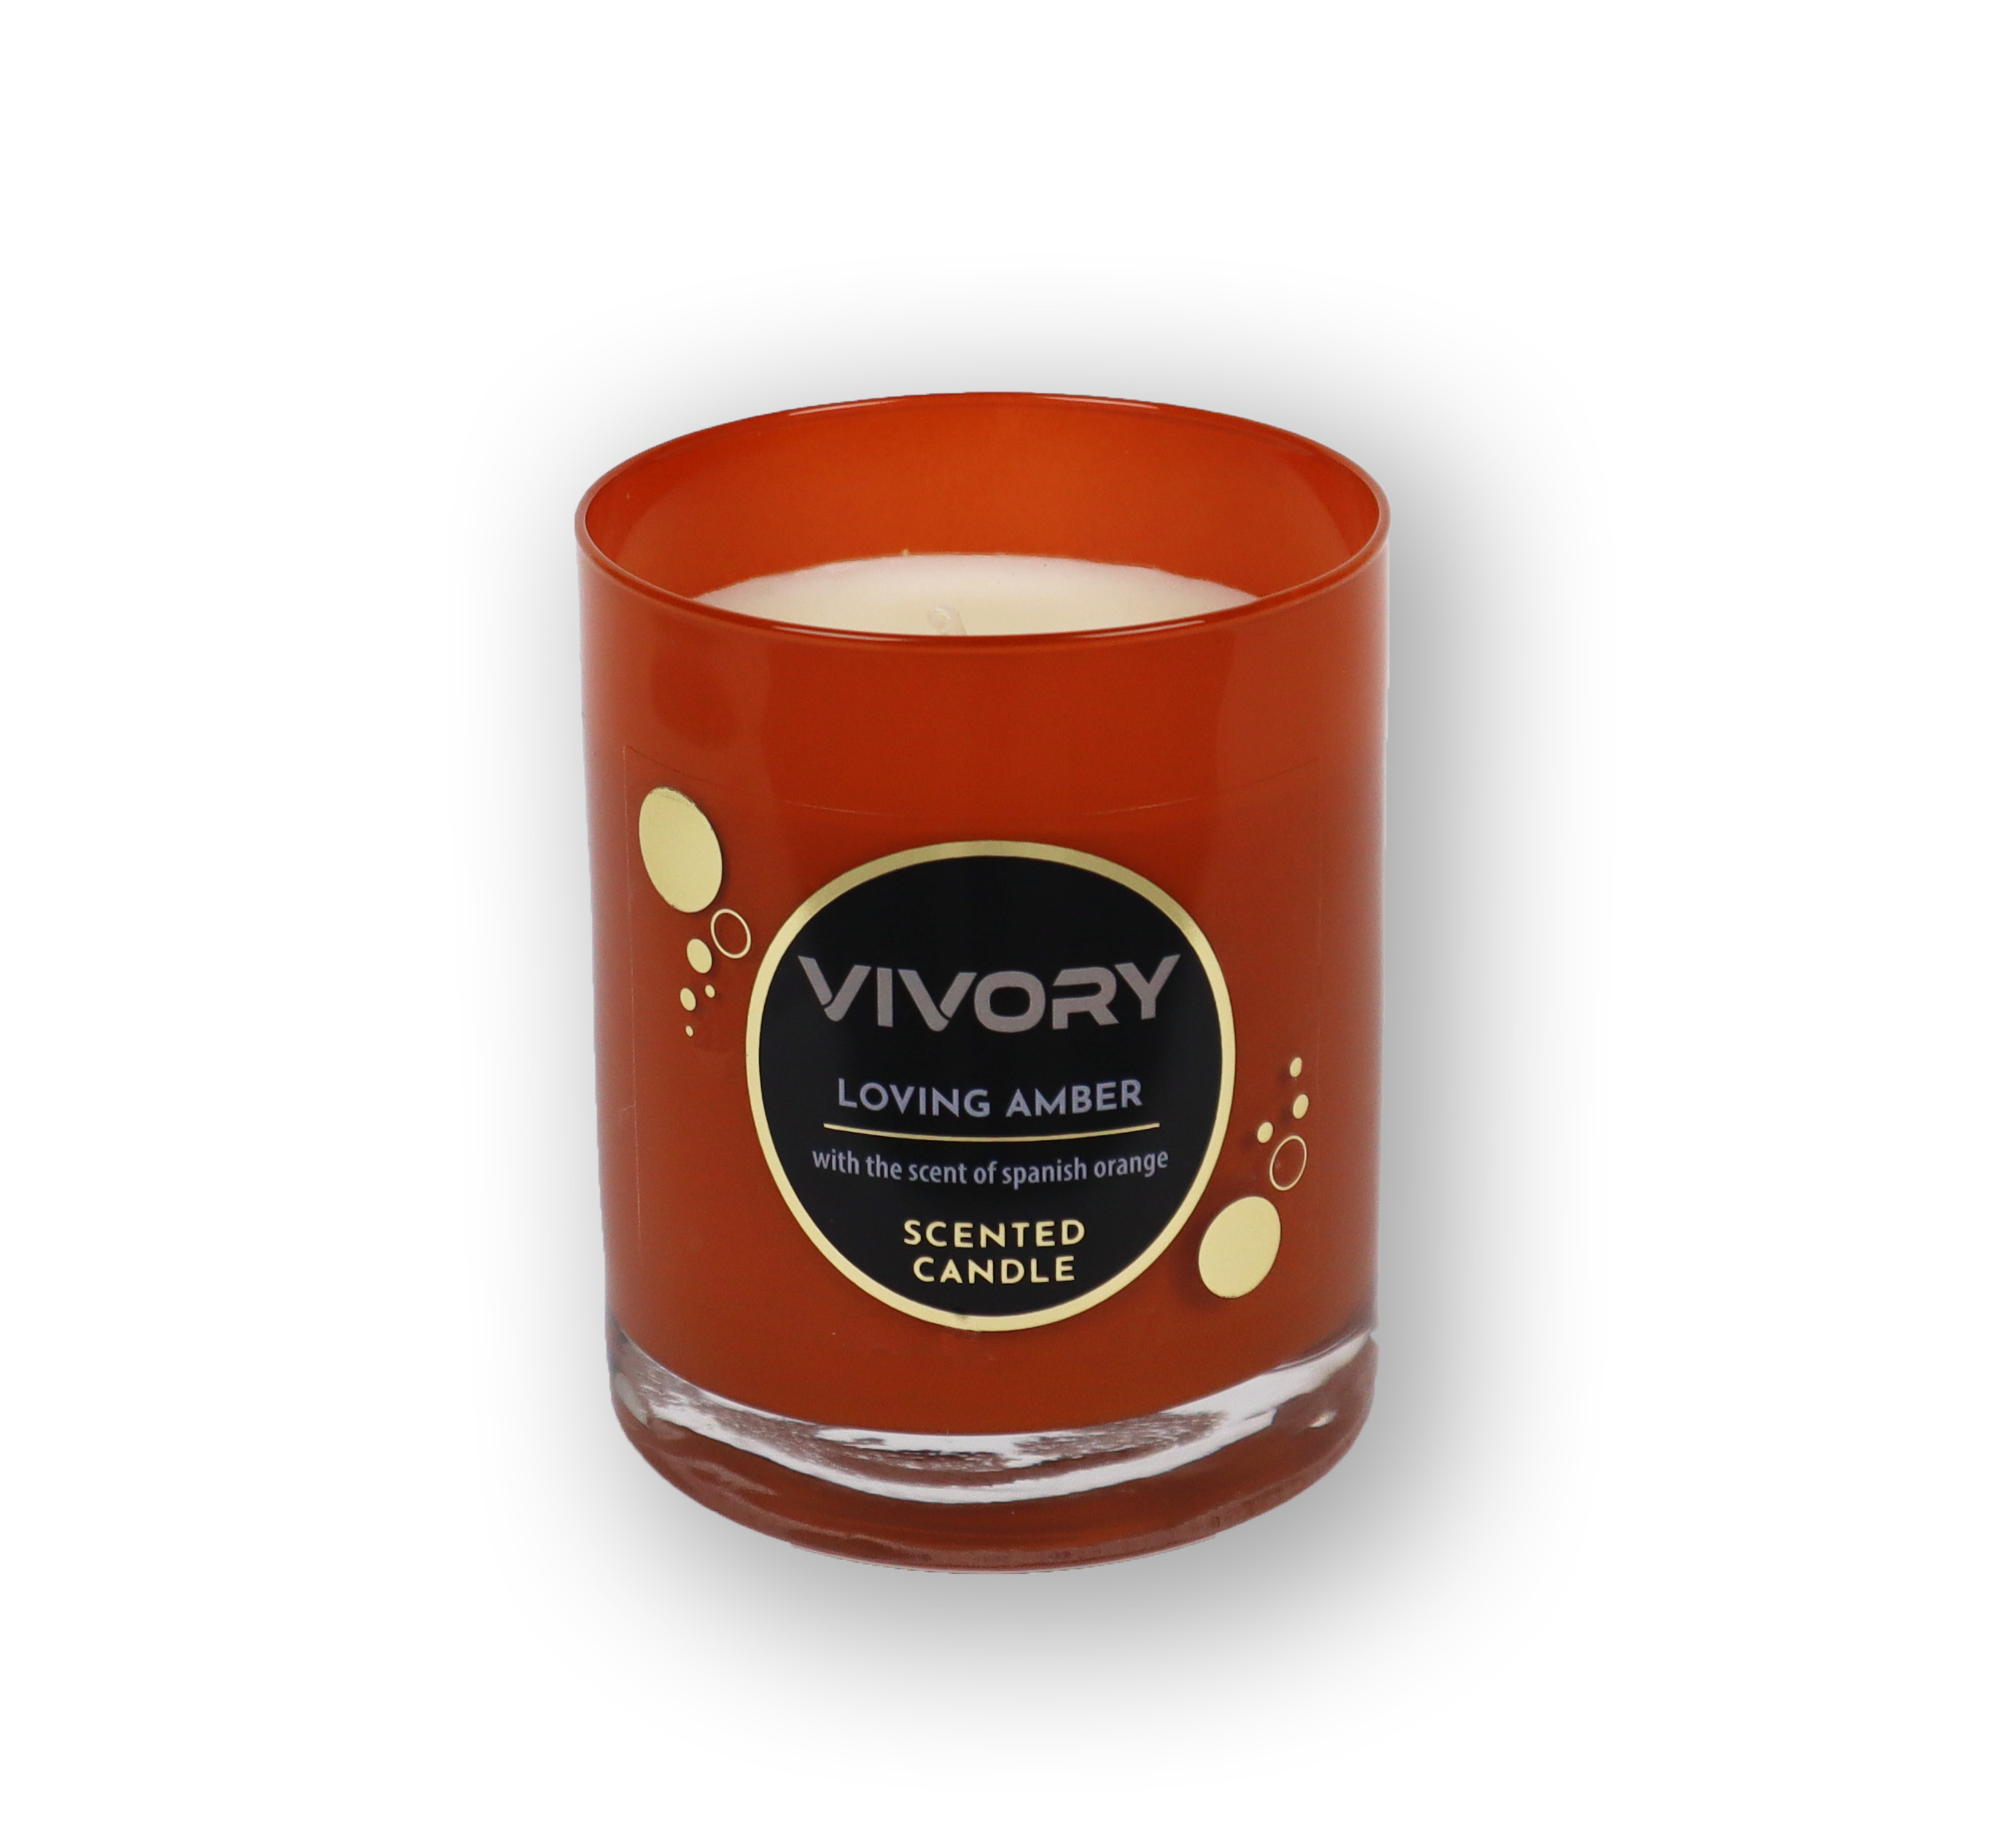 Scented Candle 190gr Loving Amber Vivory